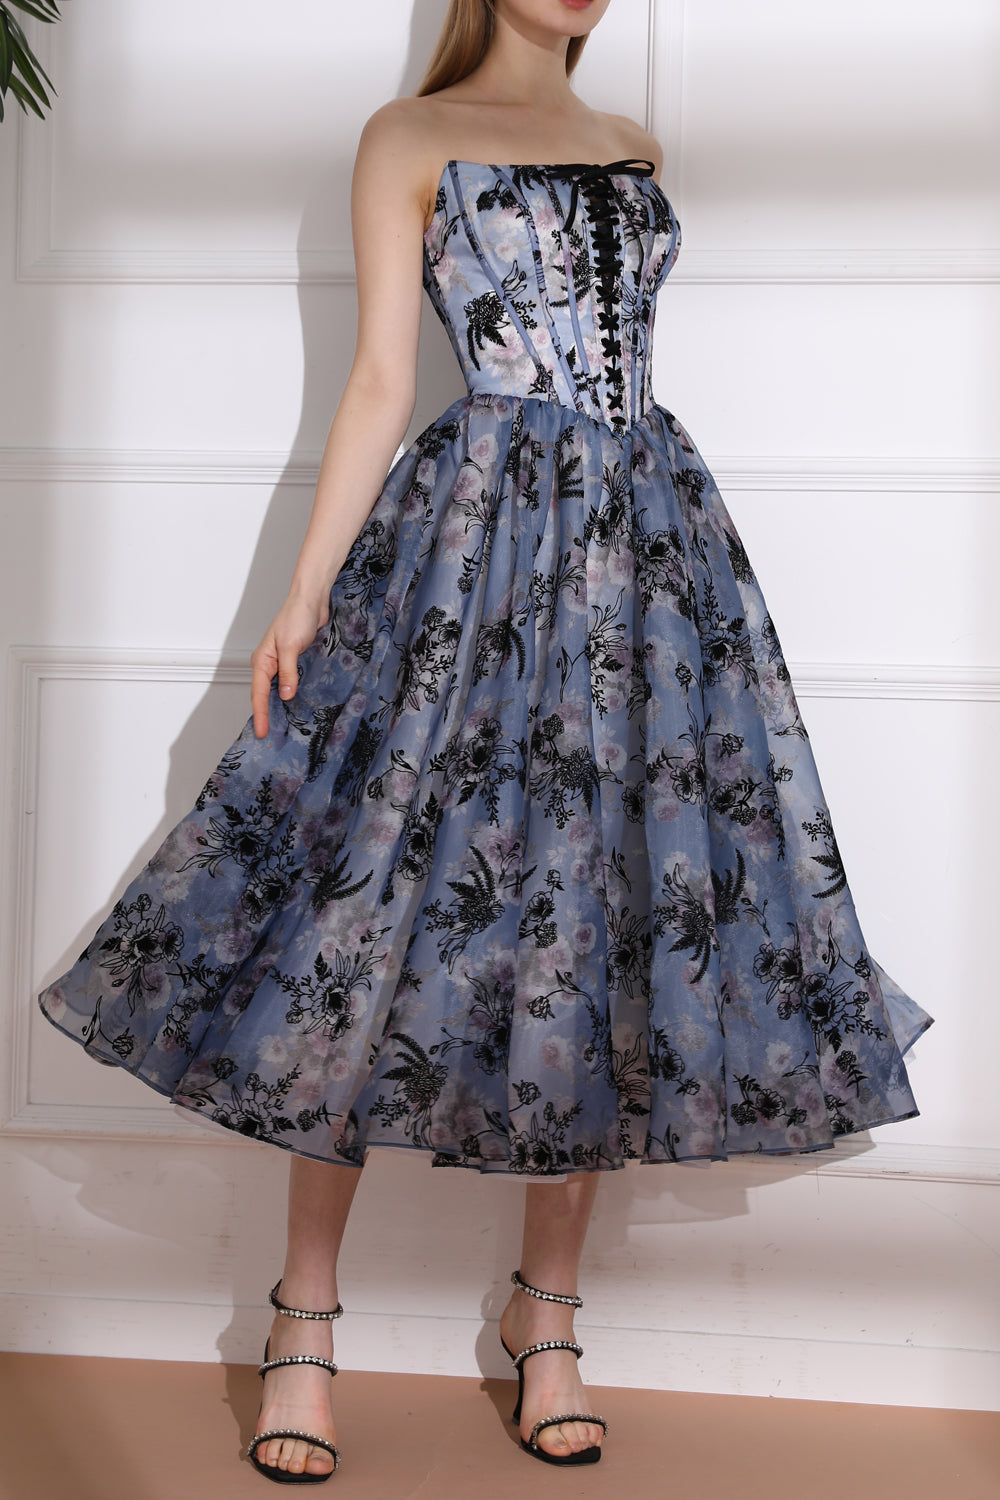 Strapless Corset with Lace Up Floral Print Midi Dress